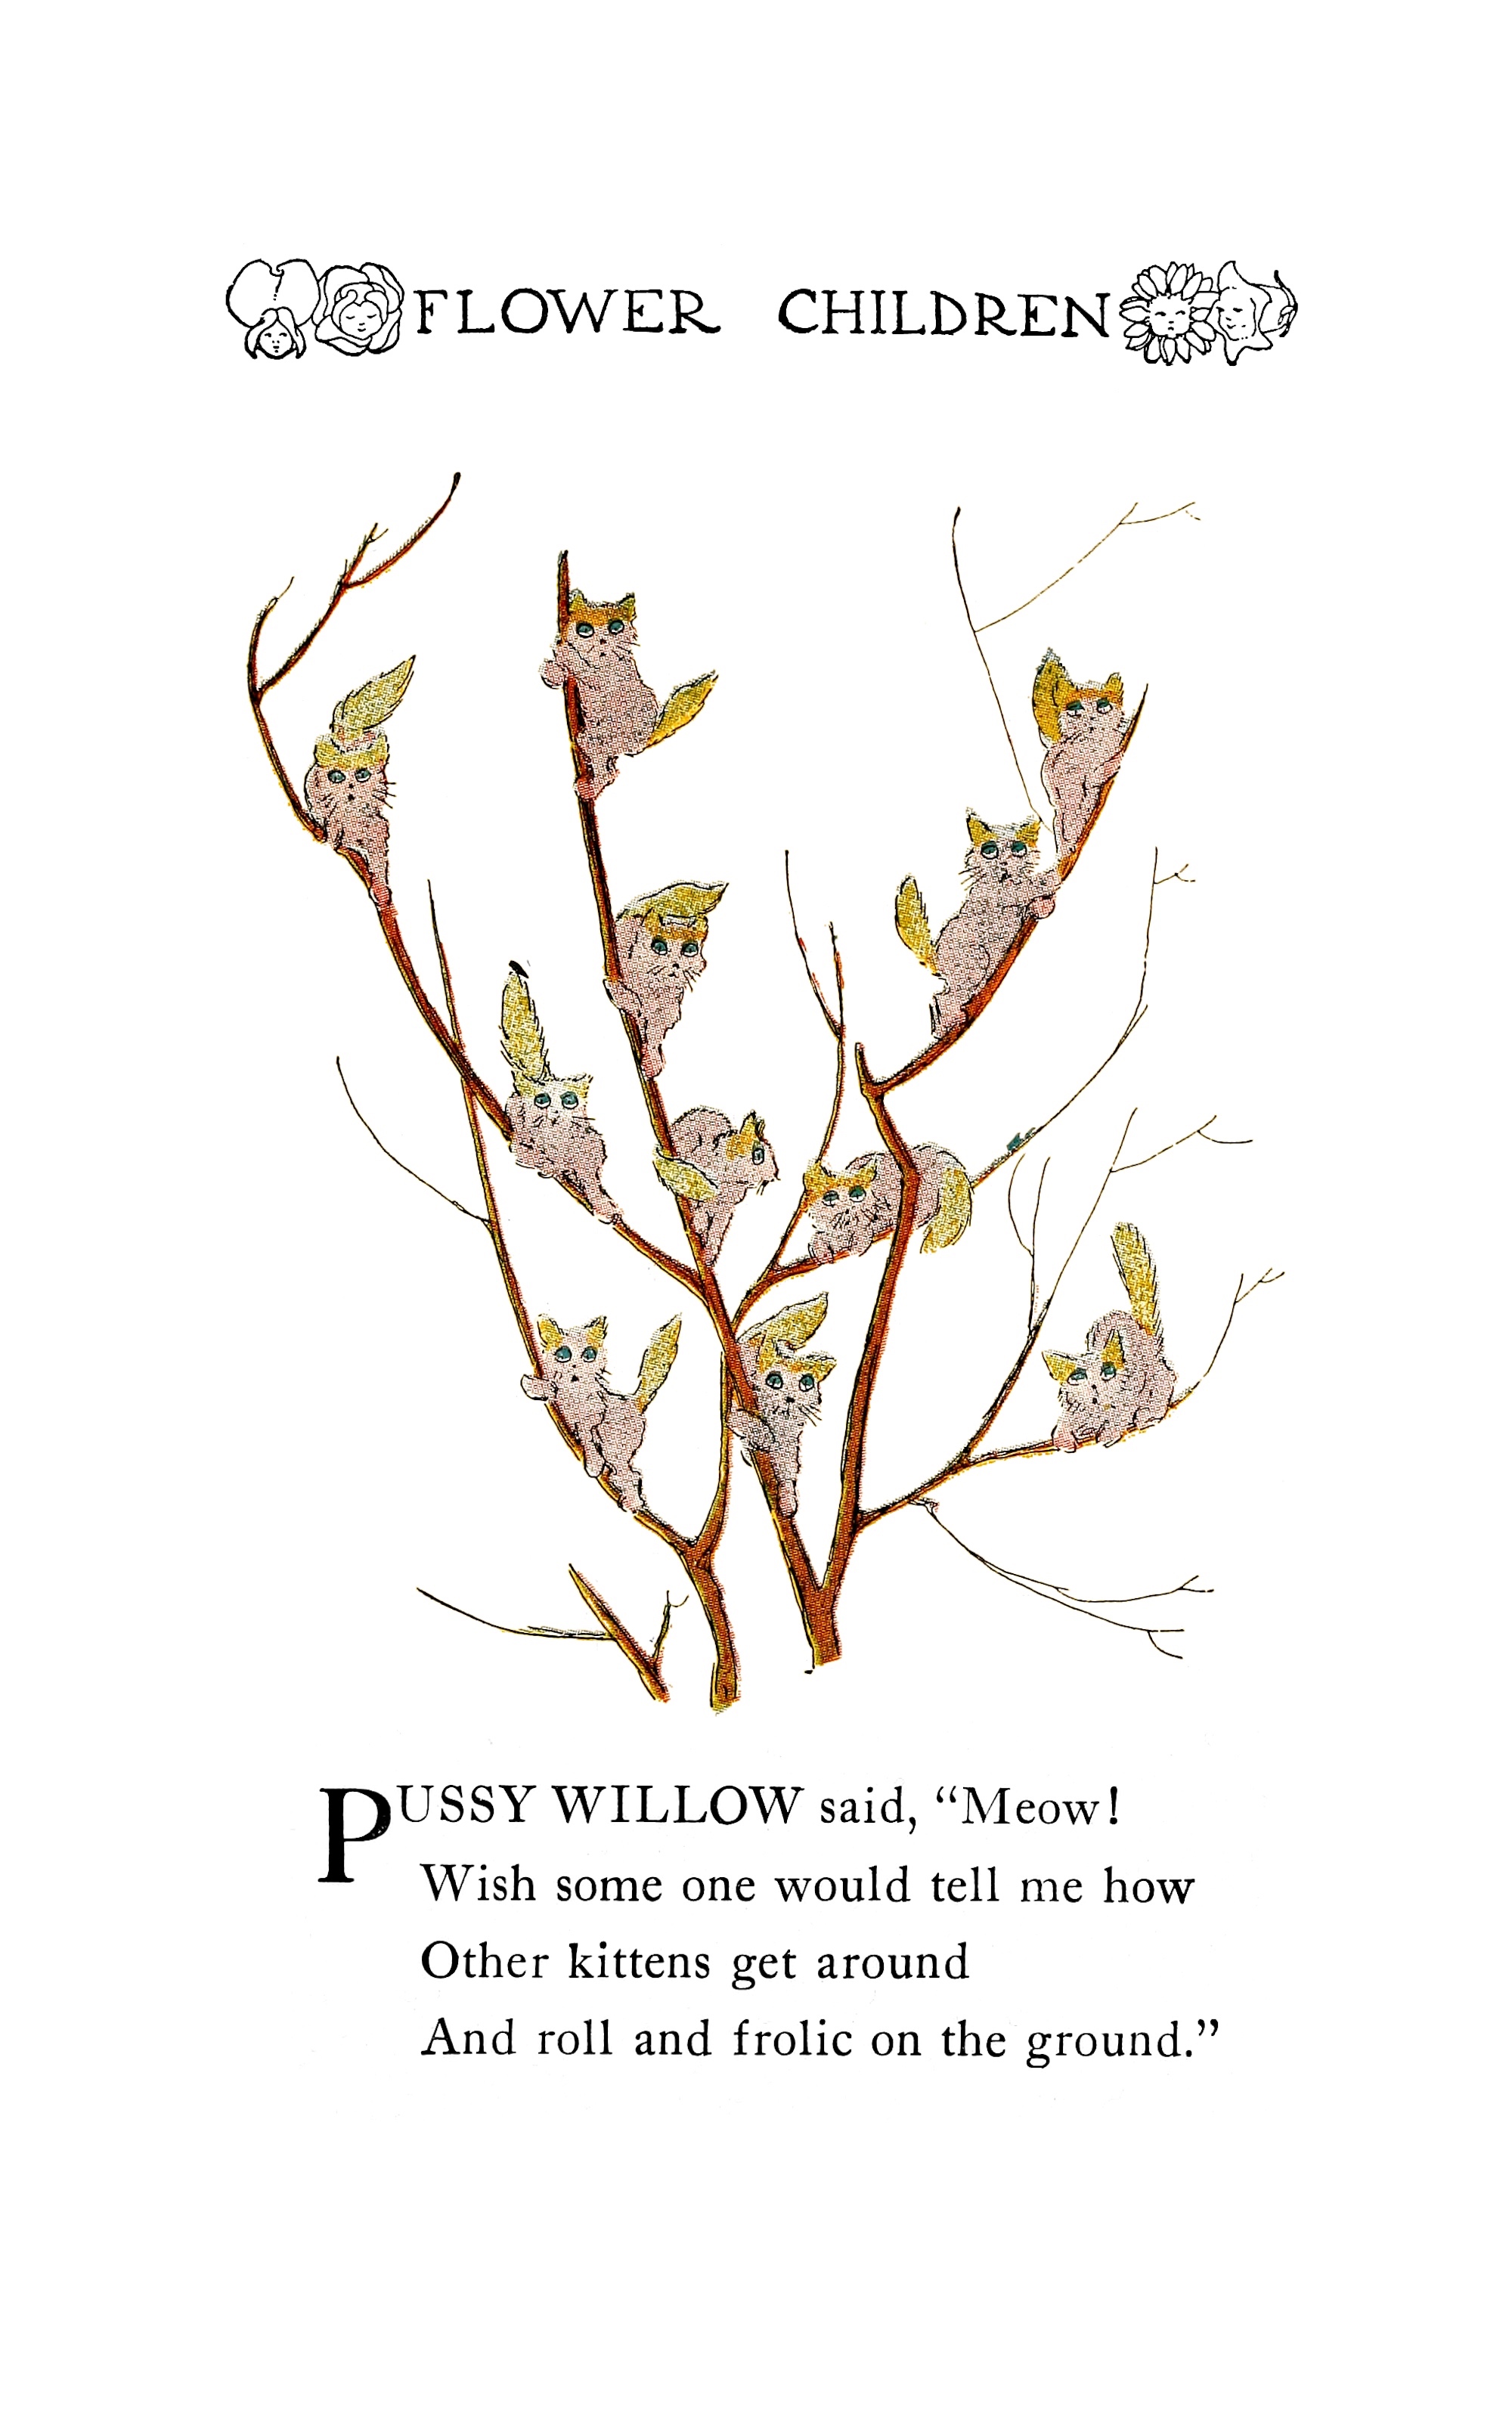 1910 Pussy Willows Flower Children by Elizabeth Gordon with illustration by M.T. (Penny) Ross.